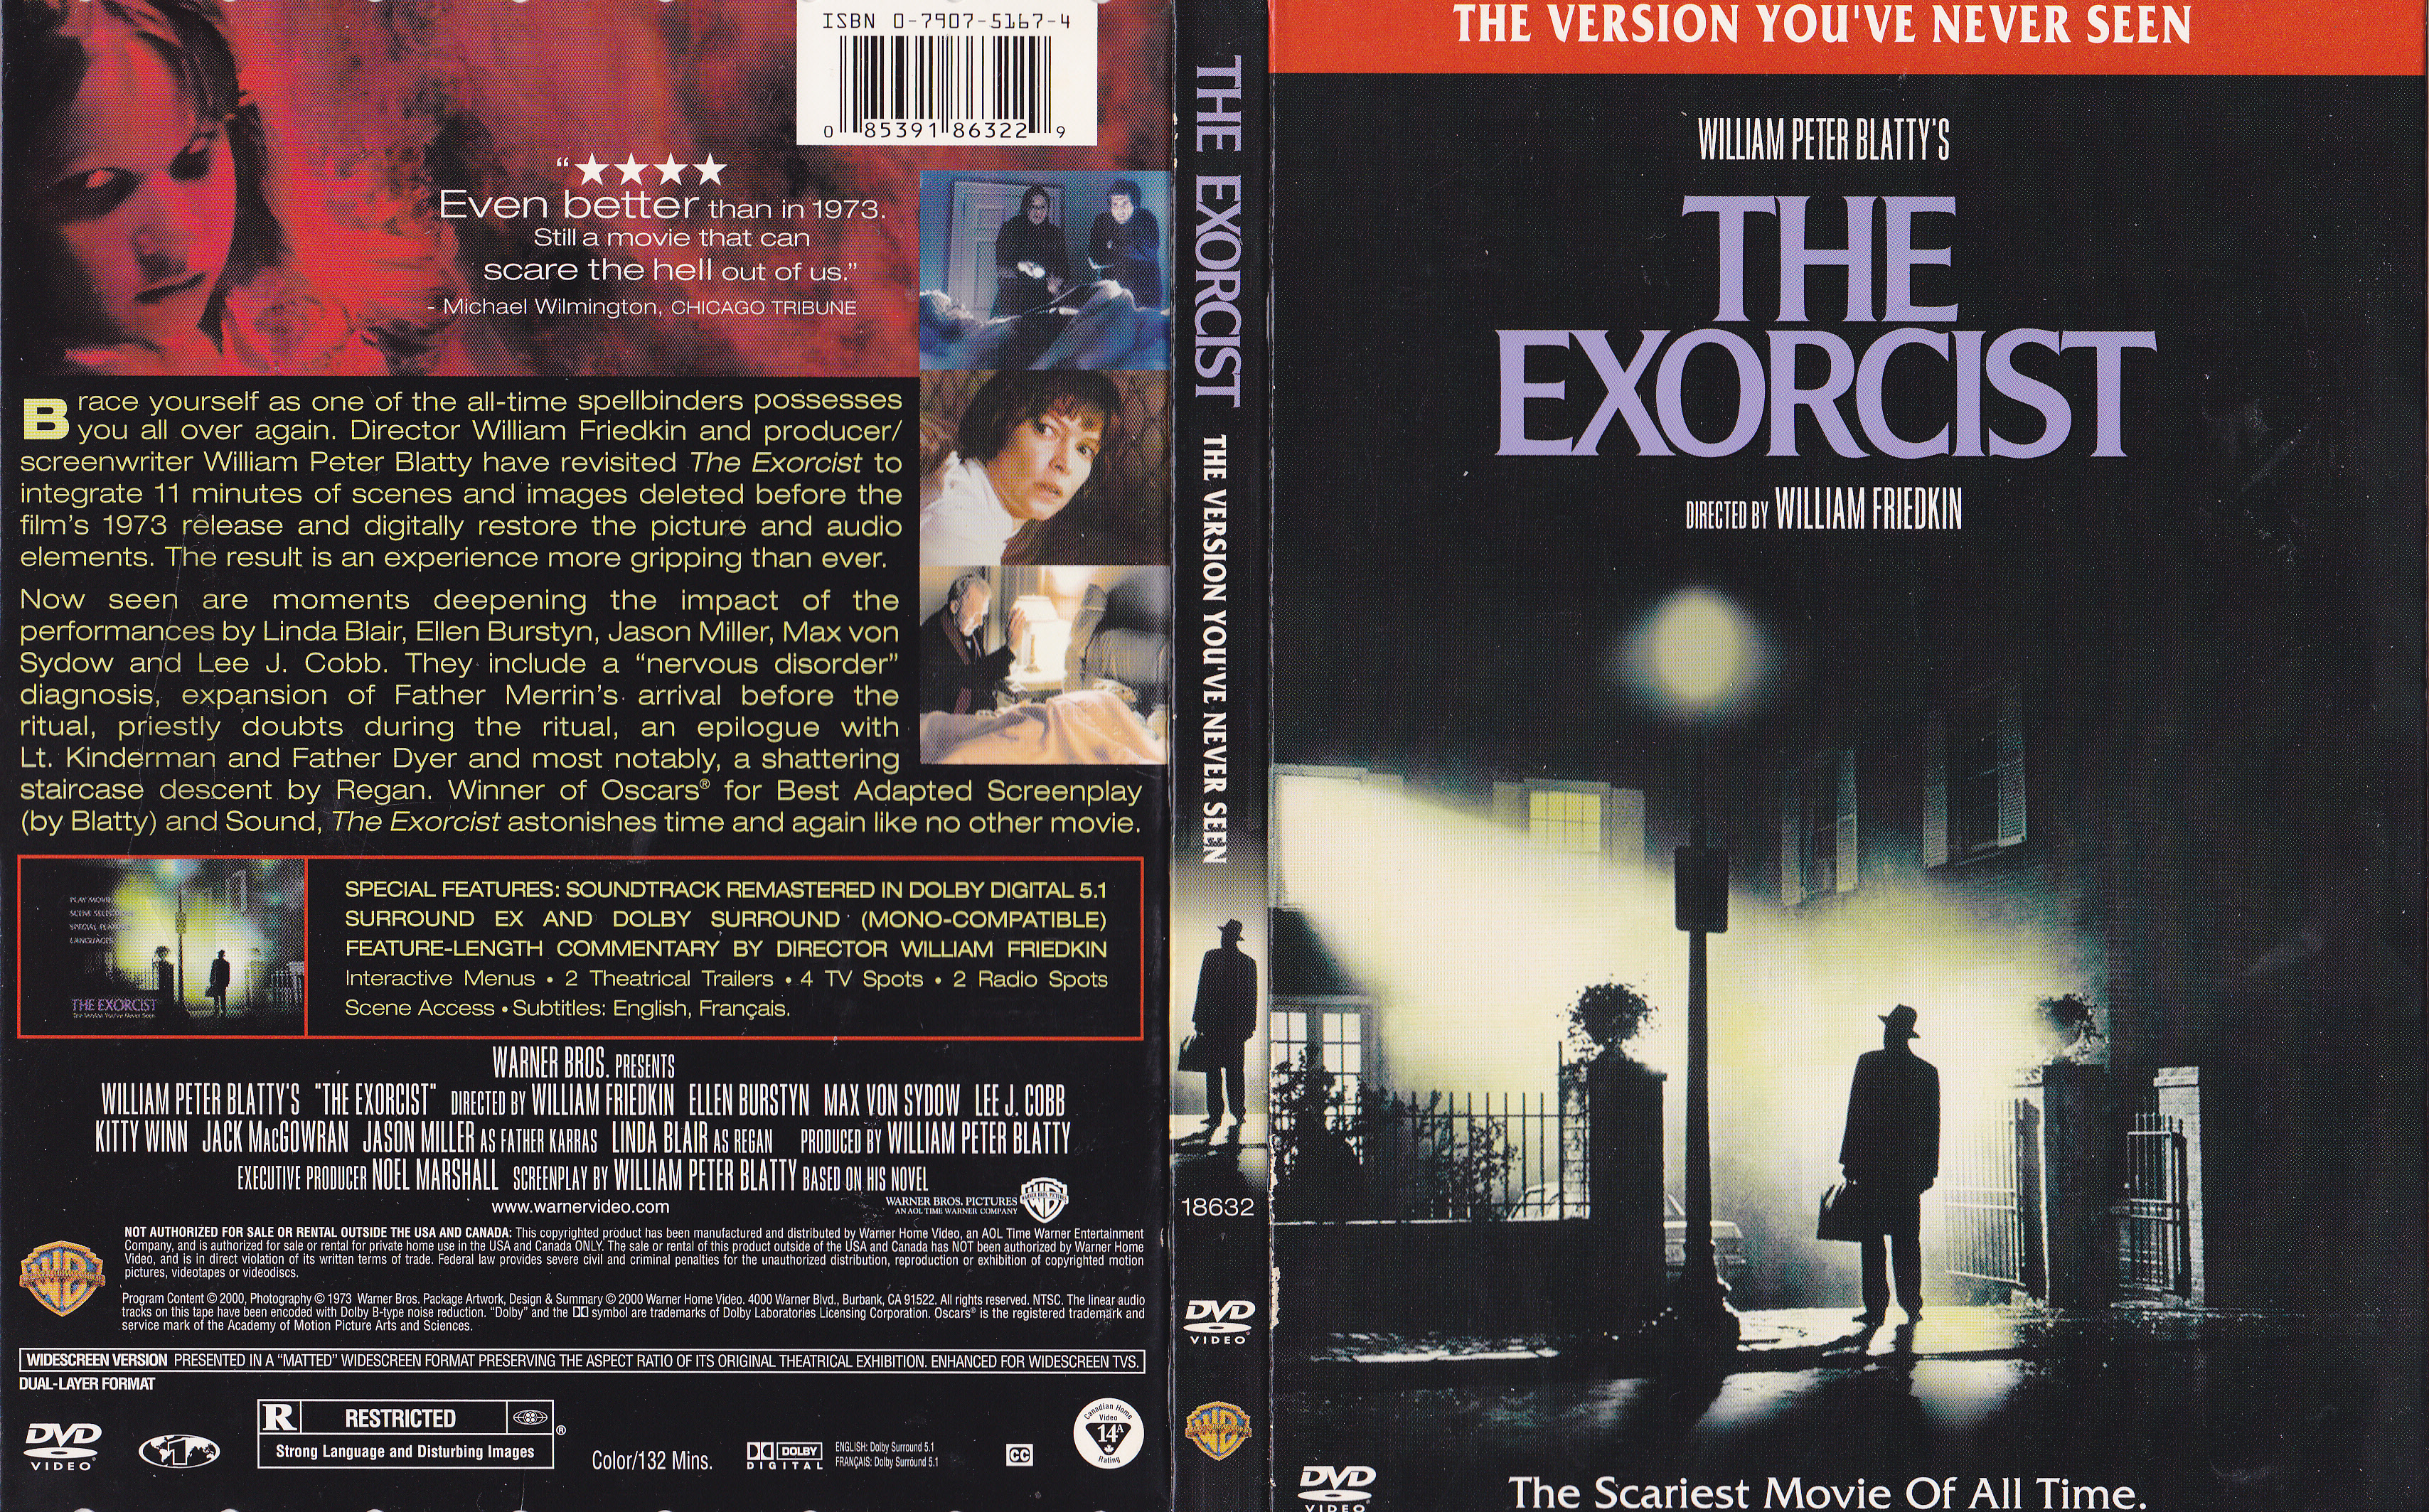 Jaquette DVD The exorcist (Canadienne) v2